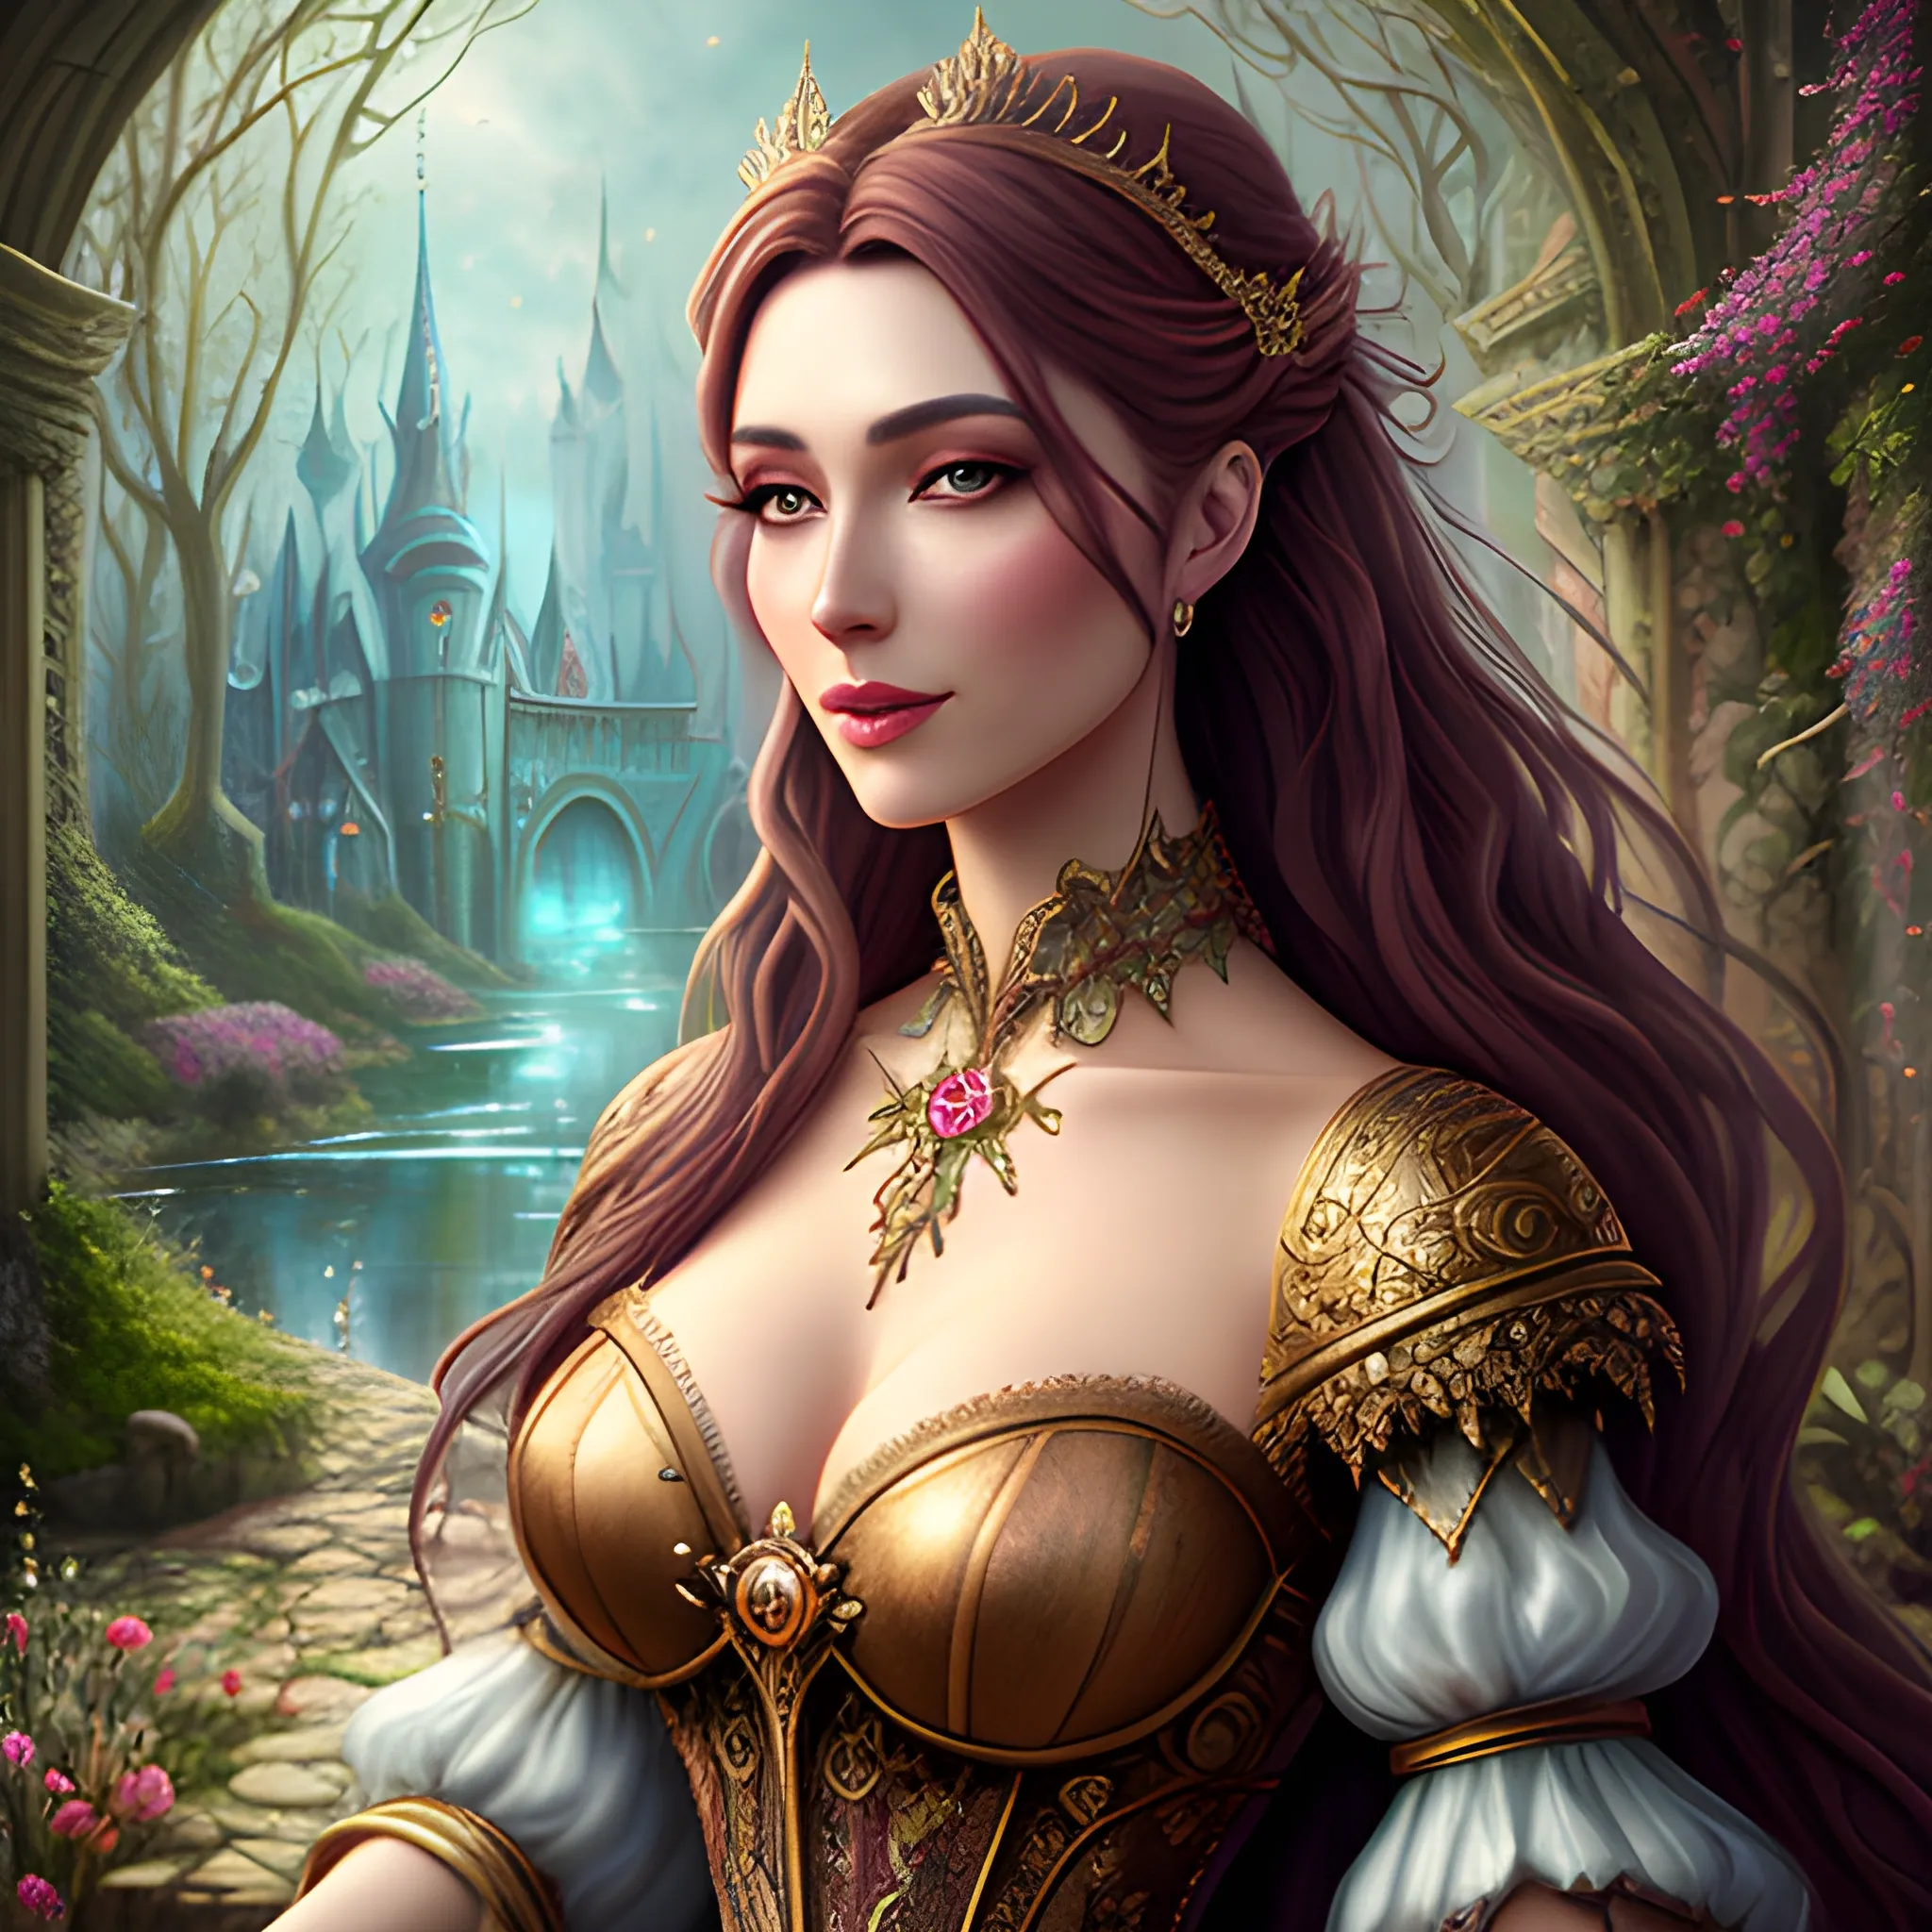 Beautiful girl, concept art, 8k intricate details, fairytale style, Oil Painting, 3D